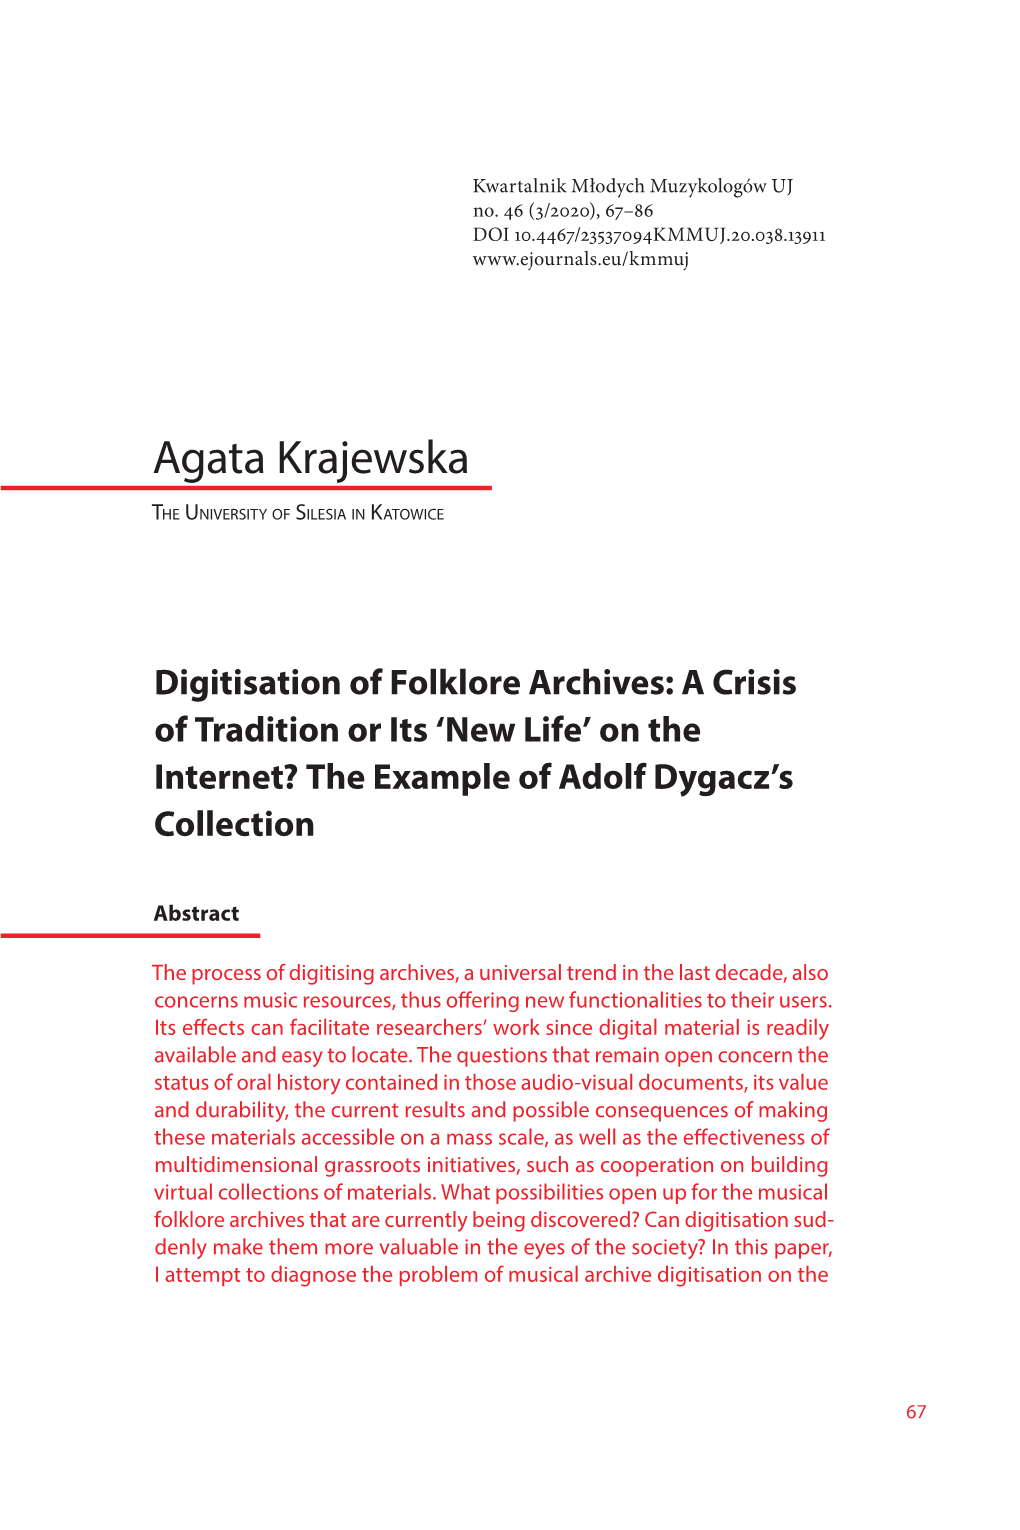 Digitisation of Folklore Archives: a Crisis of Tradition Or Its 'New Life